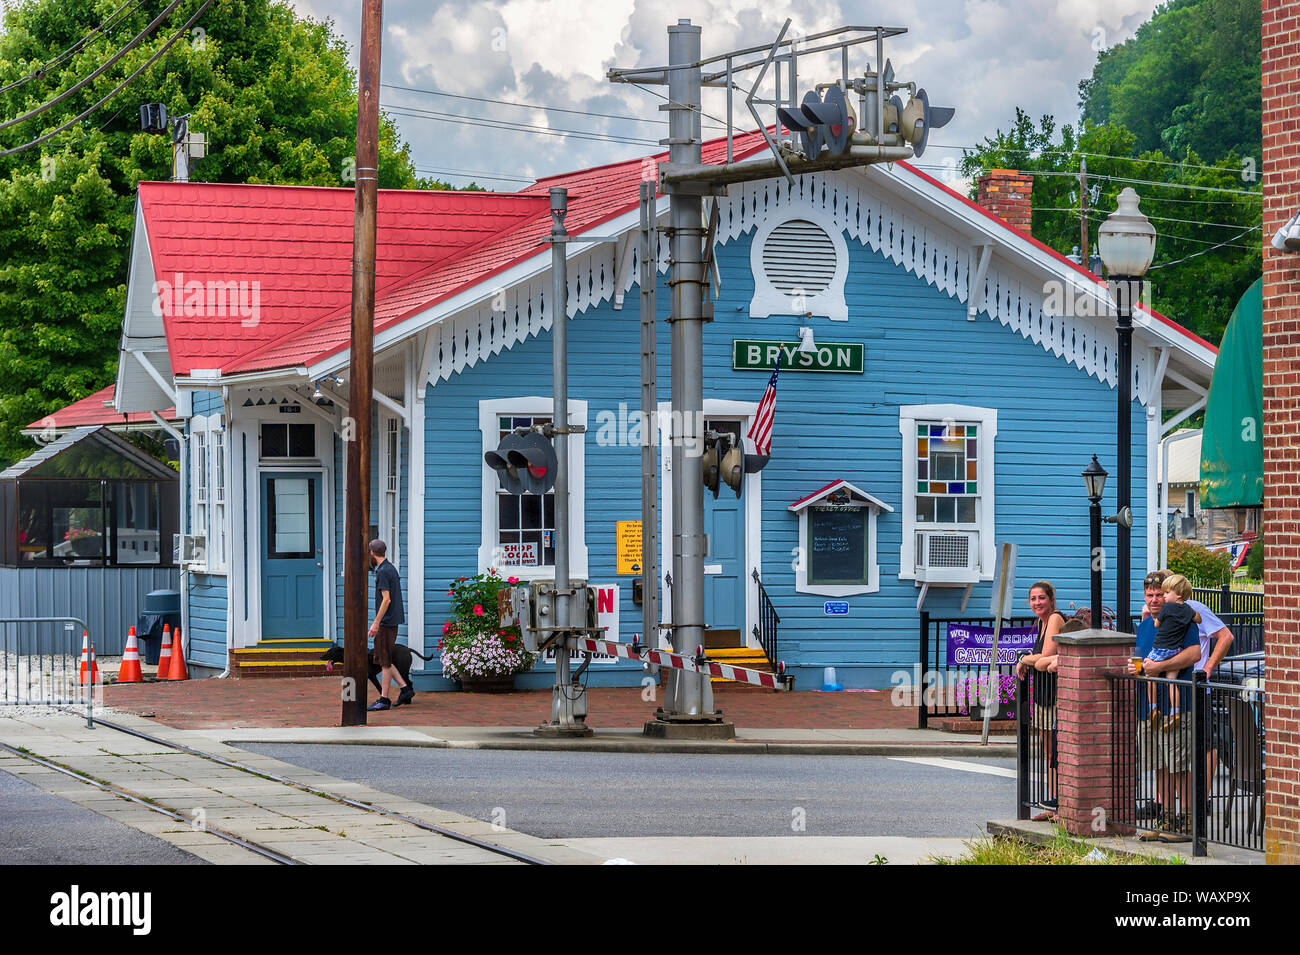 Bryson, North Carolina, USA - August 3, 2019:  People watch as the train approaches the depo in Bryson, North Carolina Stock Photo